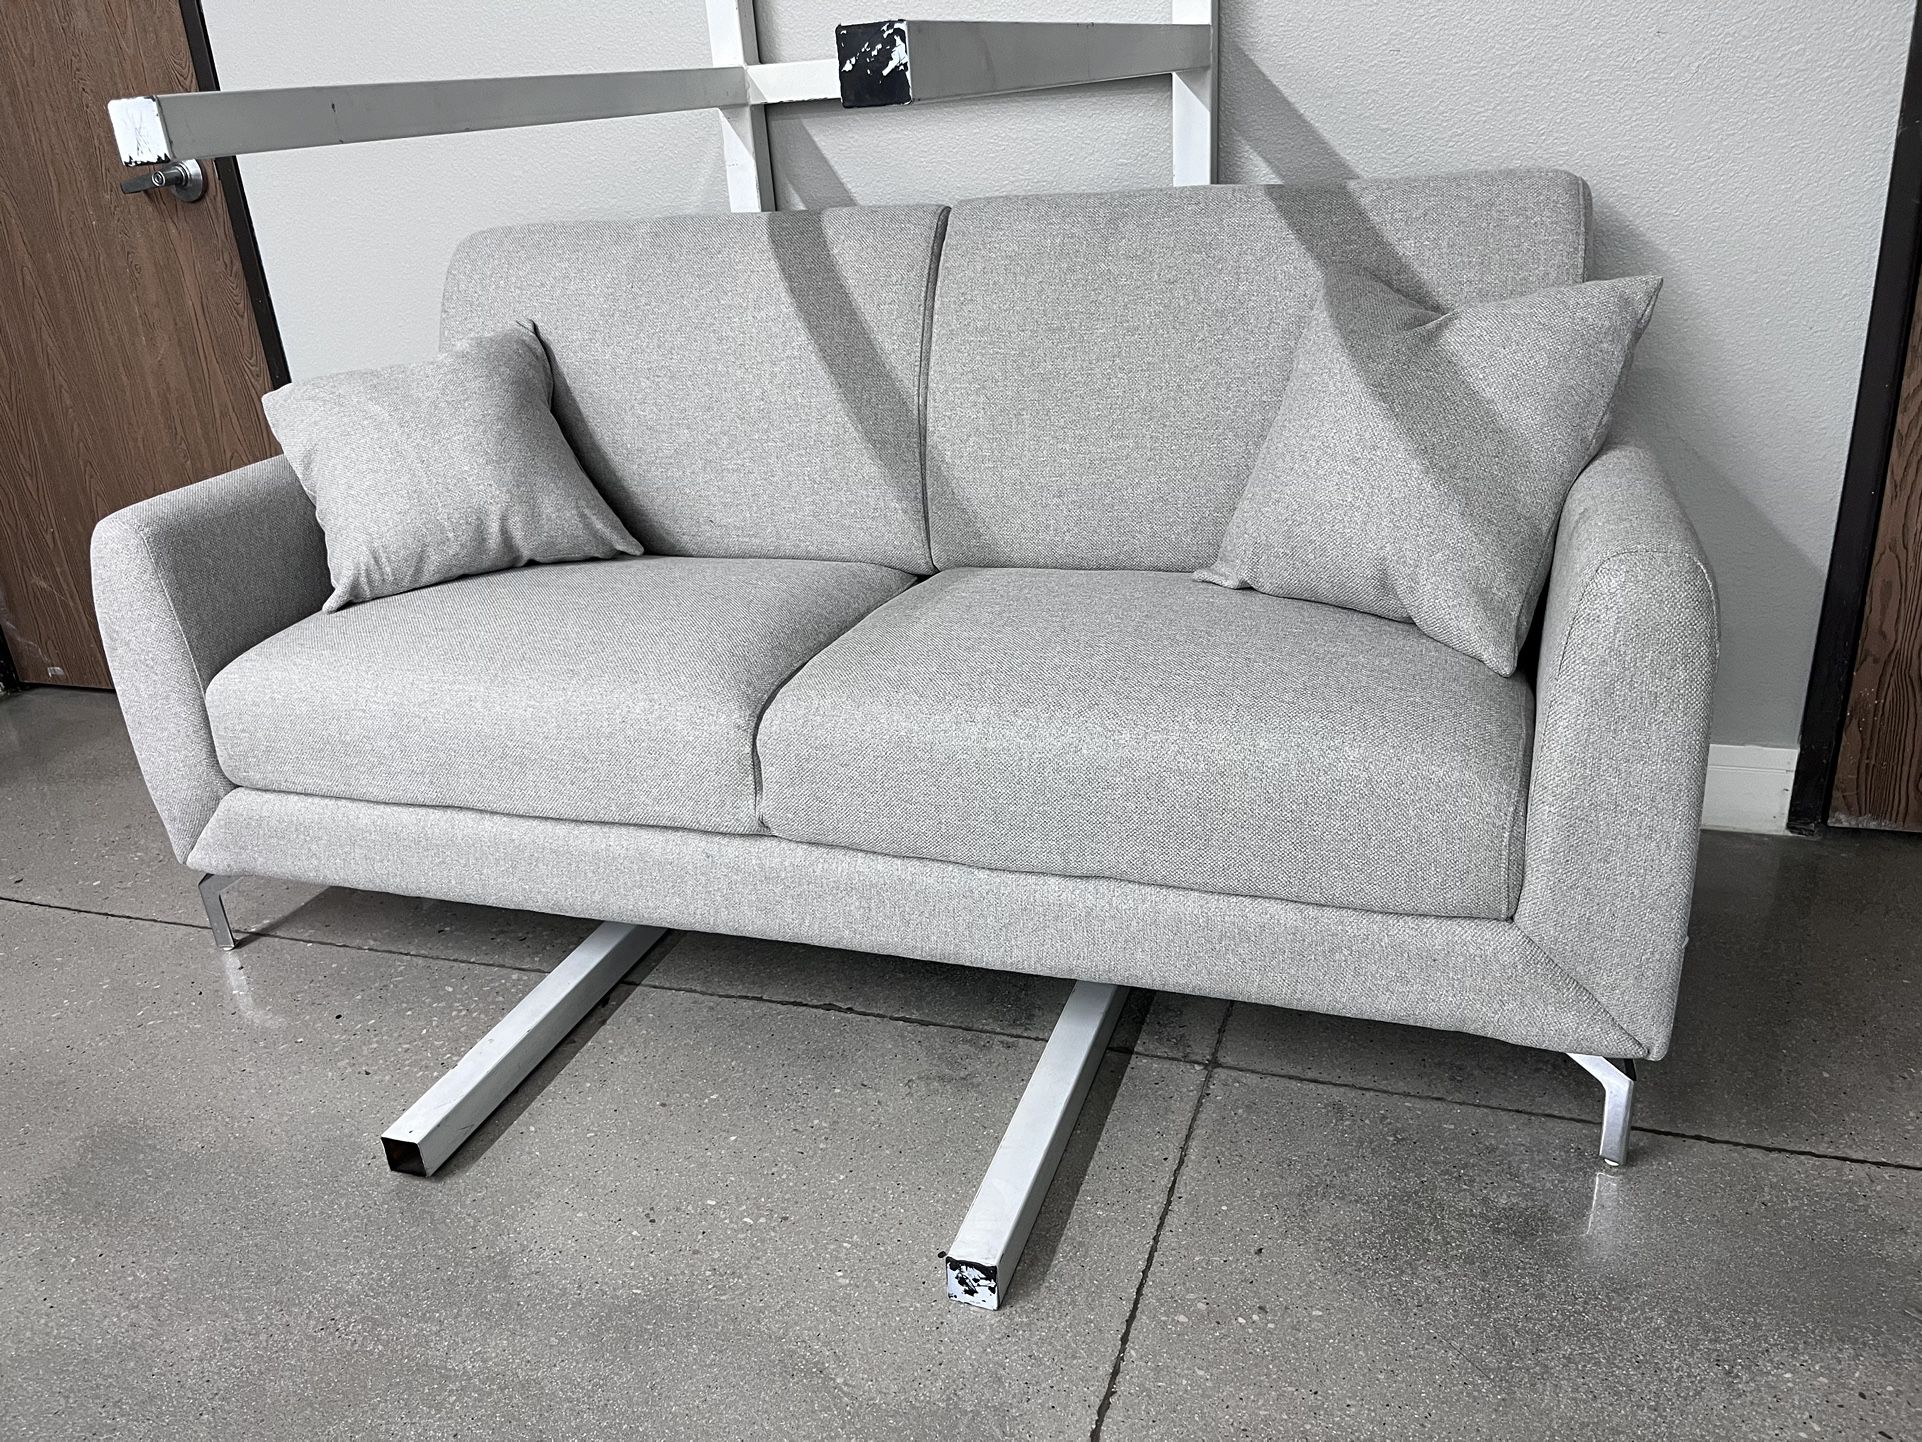 Grey Sofa Set 🔥 Take It Home With Only $50 Down 